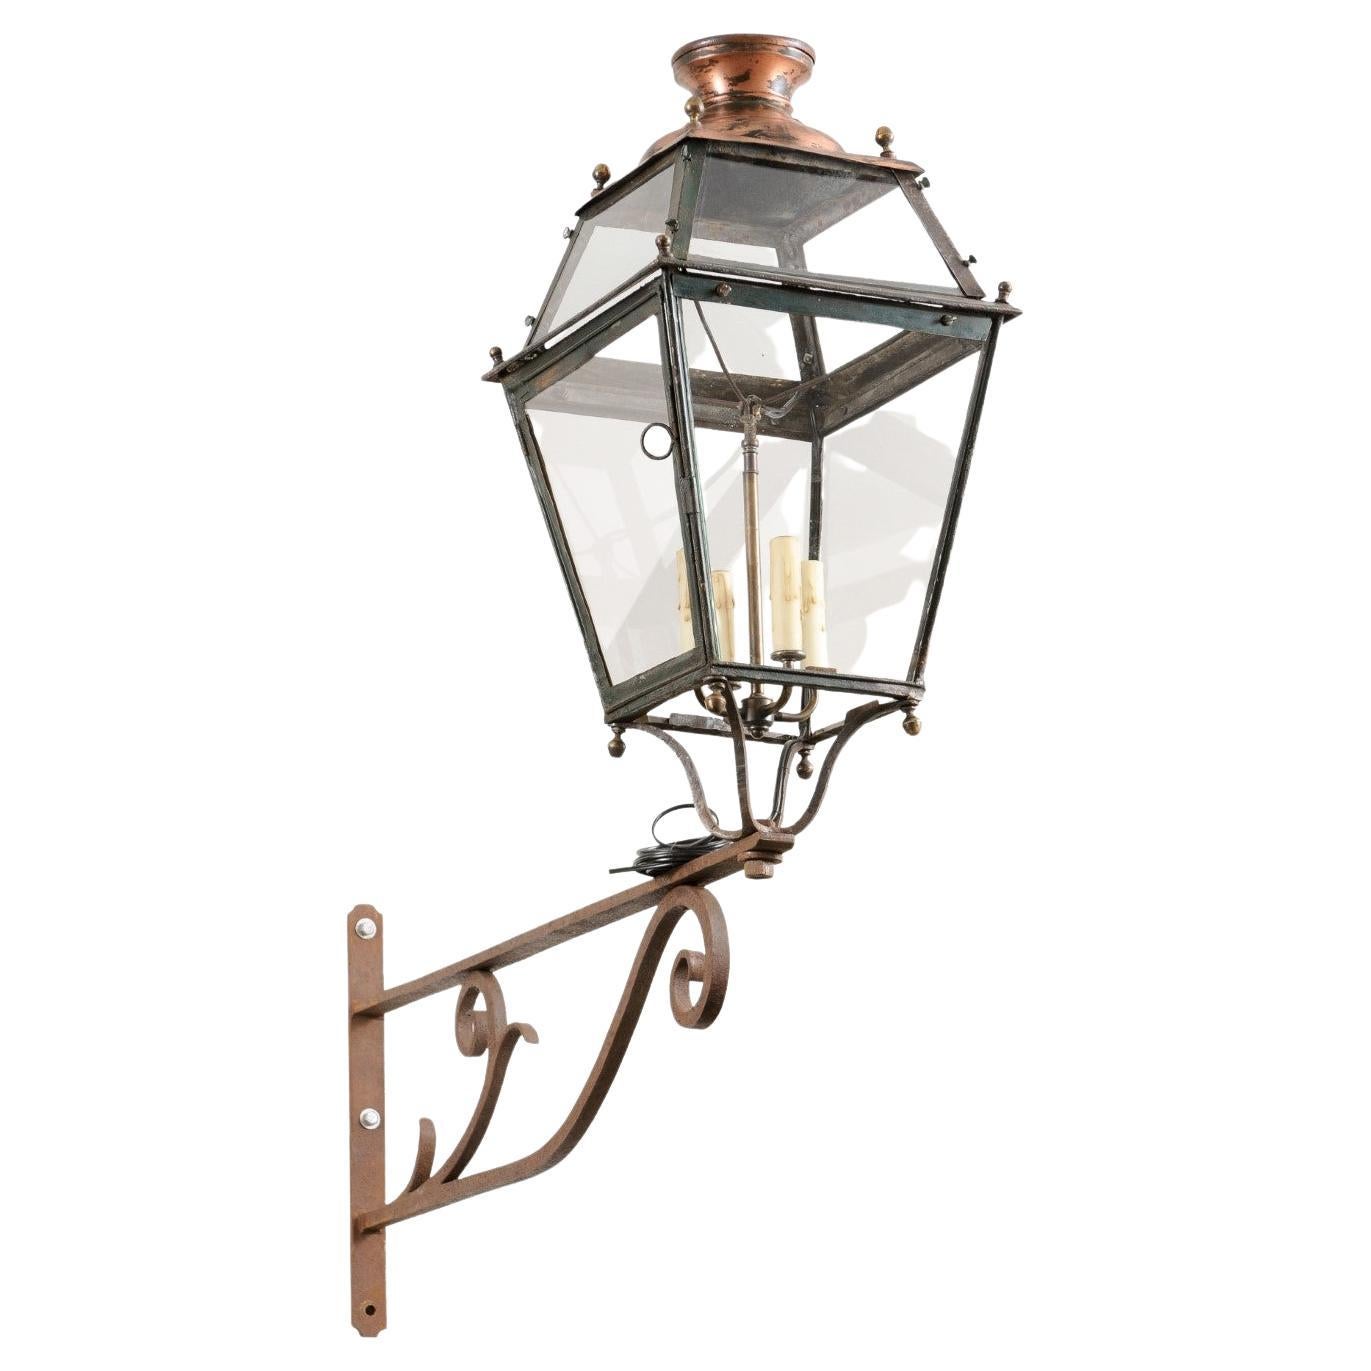 French 1890s Iron and Copper Wall Lantern with Four Lights and Scrolling Bracket For Sale